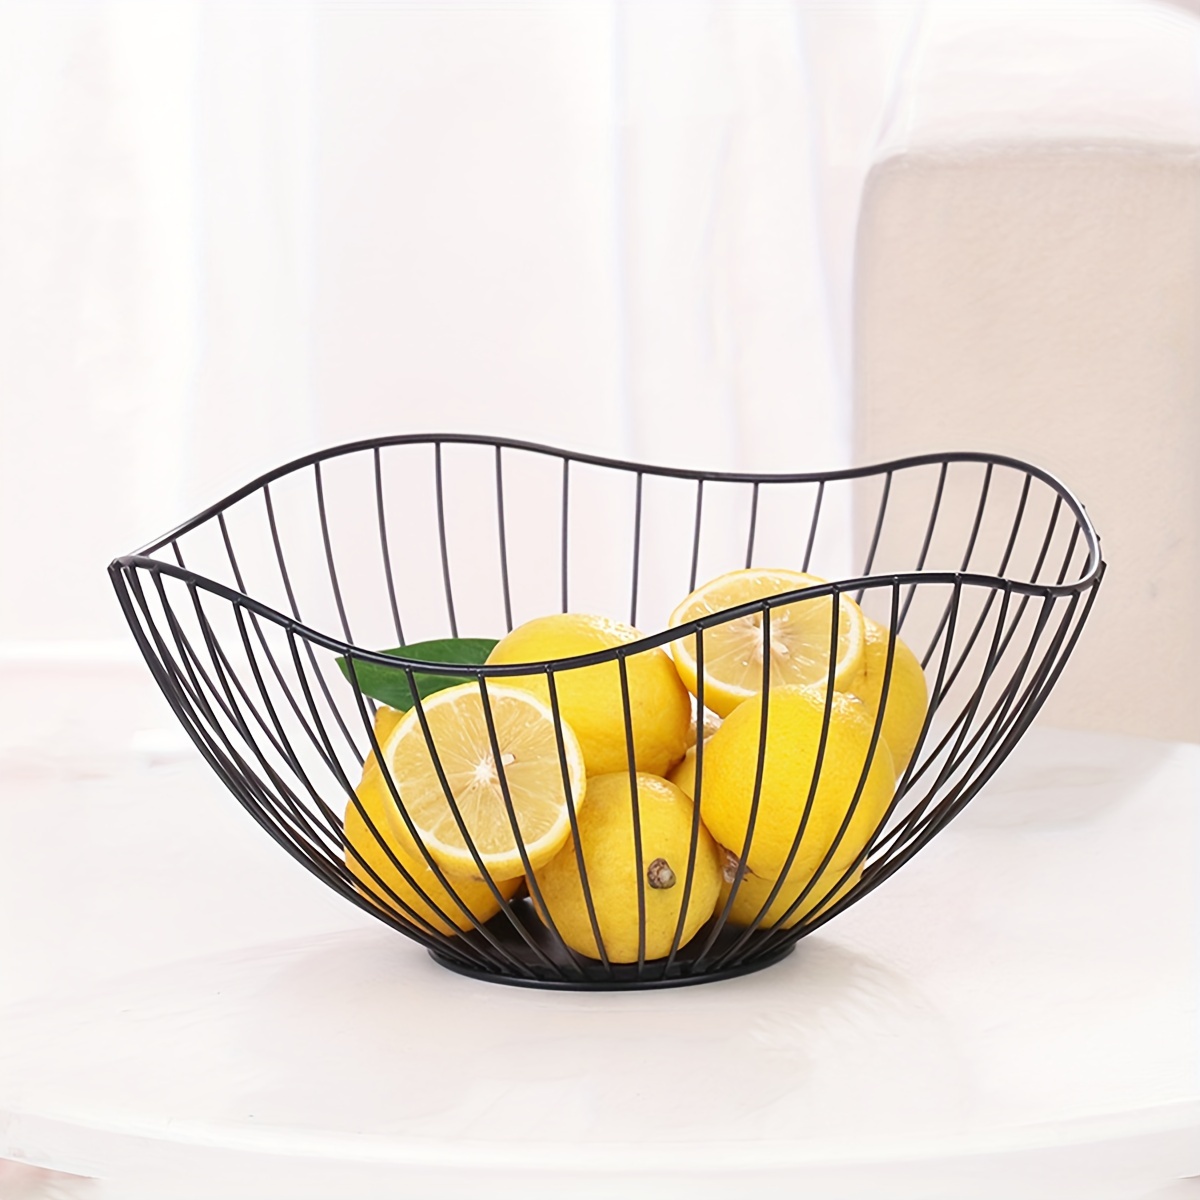 

1pc Modern Black Metal Wire Fruit Basket, 10.24in Large Decorative Storage Bowl, Classic Nordic Style Home Living Room Organizer For Fruits And Household Items